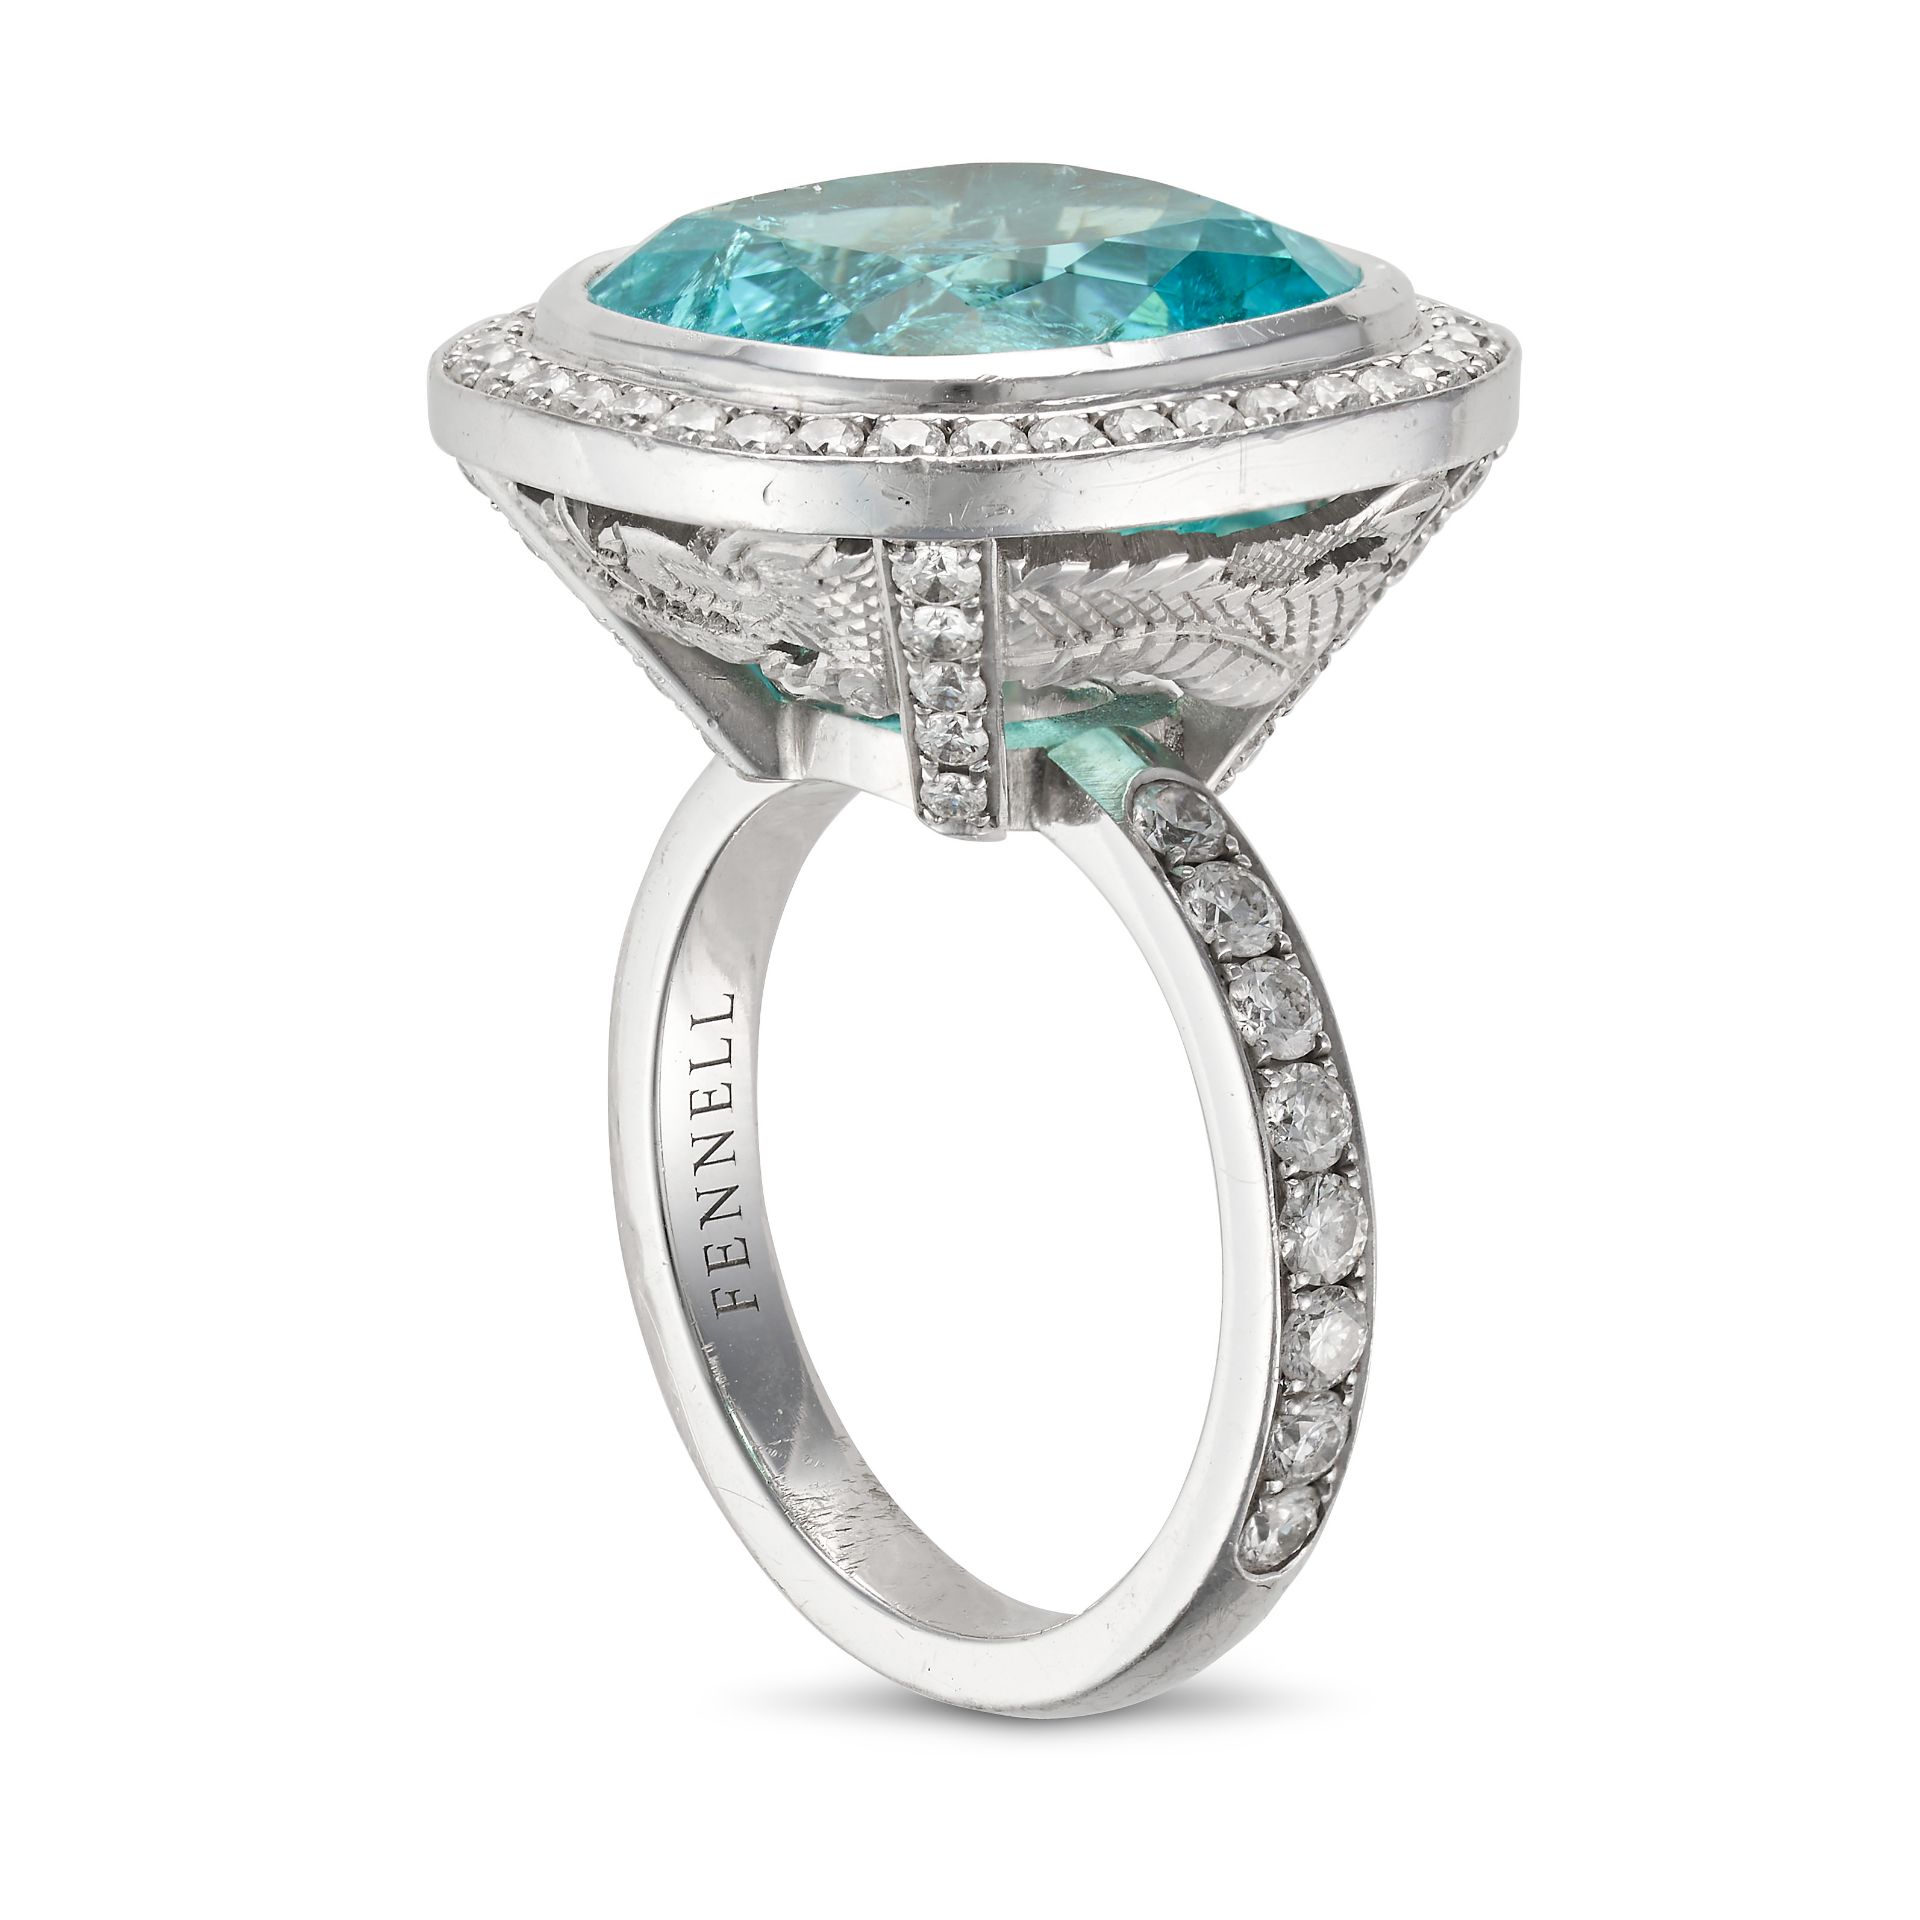 THEO FENNELL, A 11.43 CARAT PARAIBA TOURMALINE AND DIAMOND RING in 18ct white gold, set with a cu... - Bild 2 aus 3